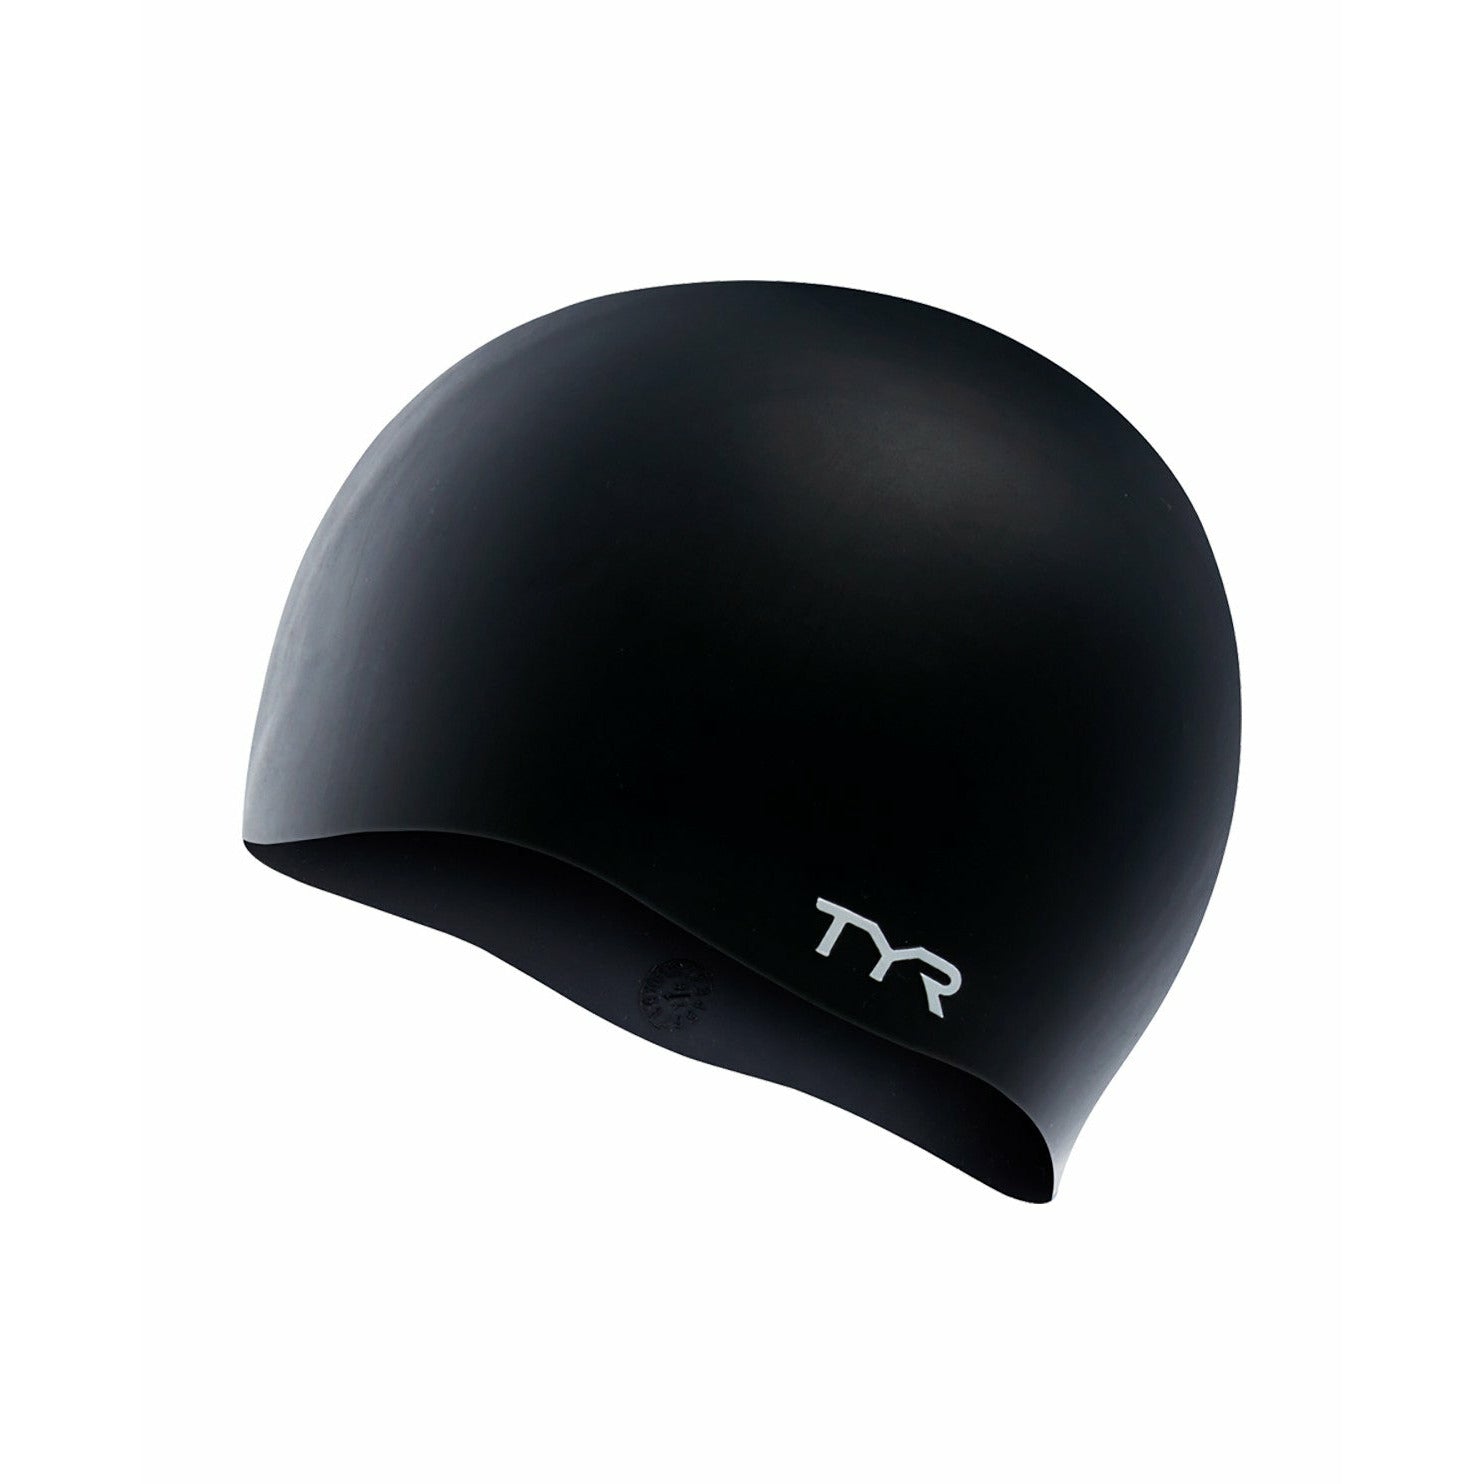 TYR Wrinkle-Free Silicone Cap